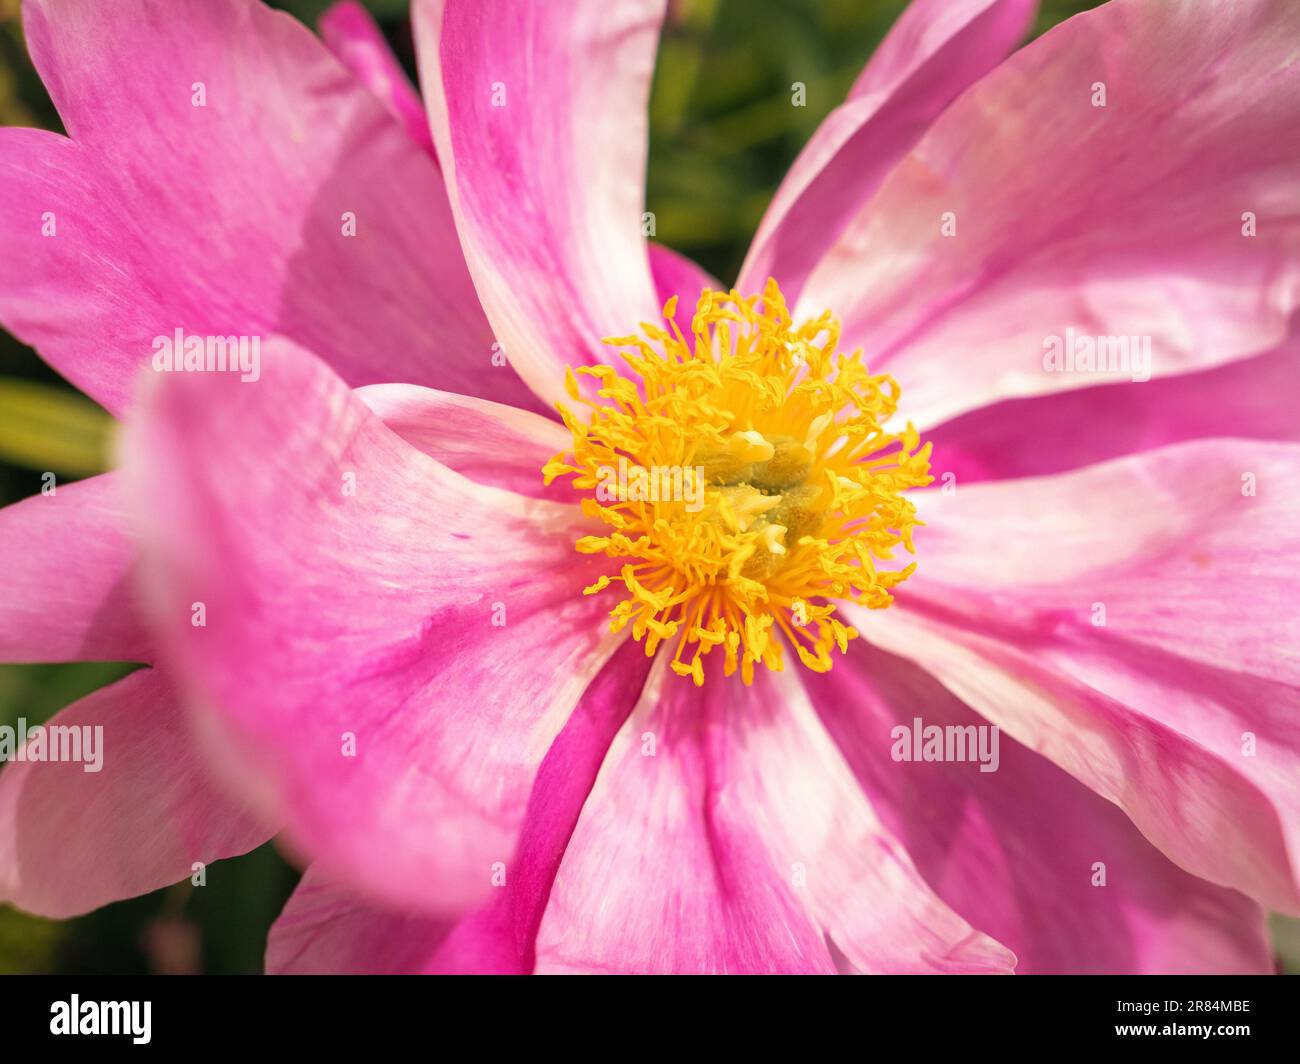 flower core of blooming pink tree peony, flowering spring flower, close up view with copy space Stock Photo